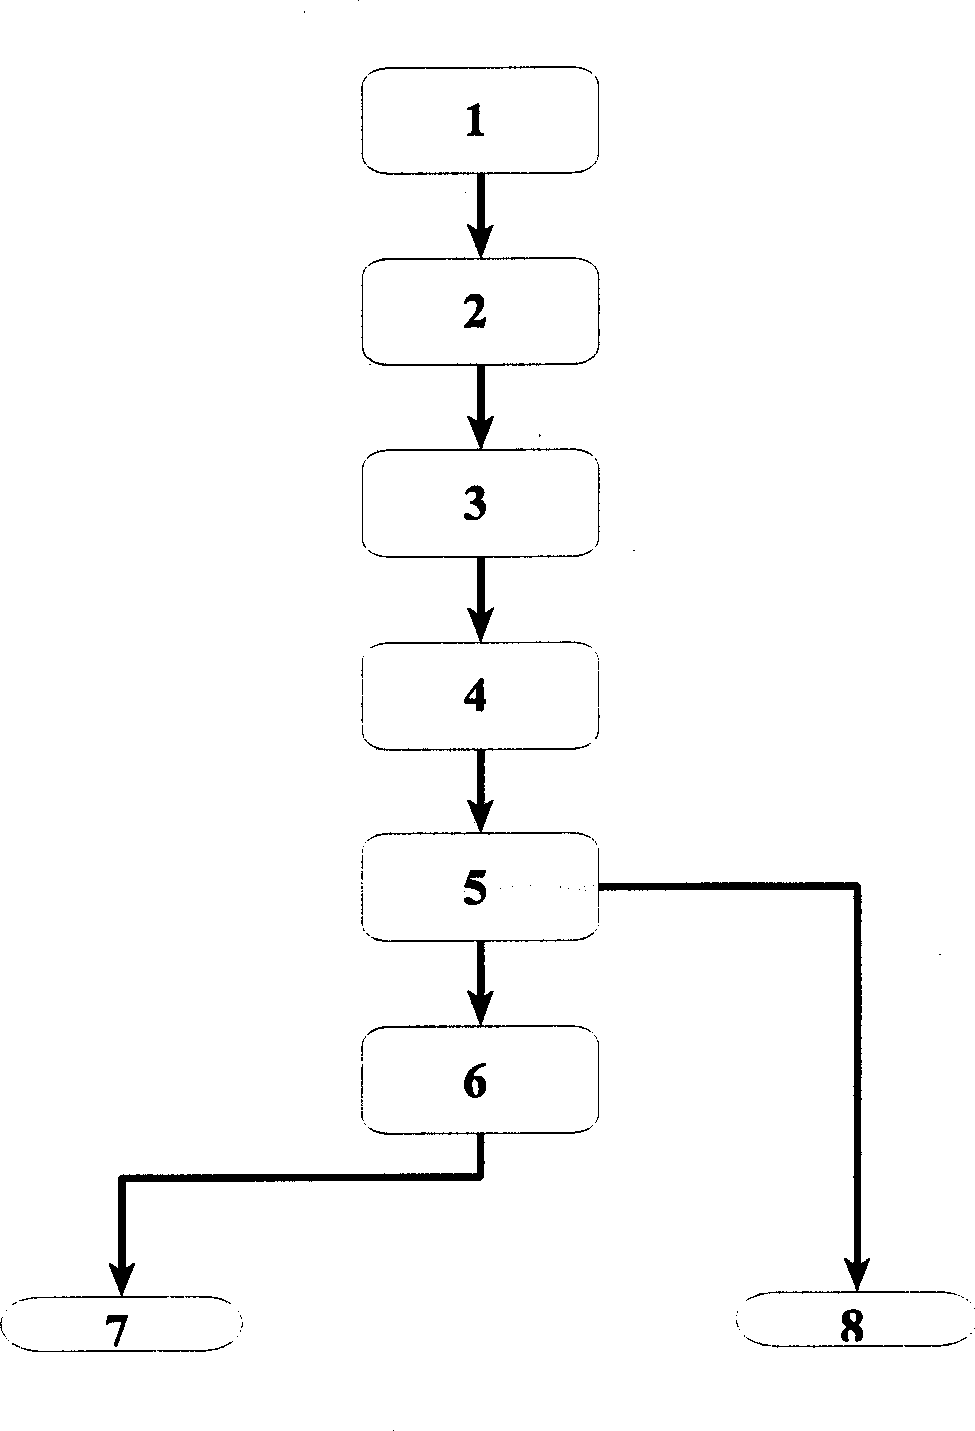 Process for separating and purifying ebormycine from fermented myxobacterium liquid